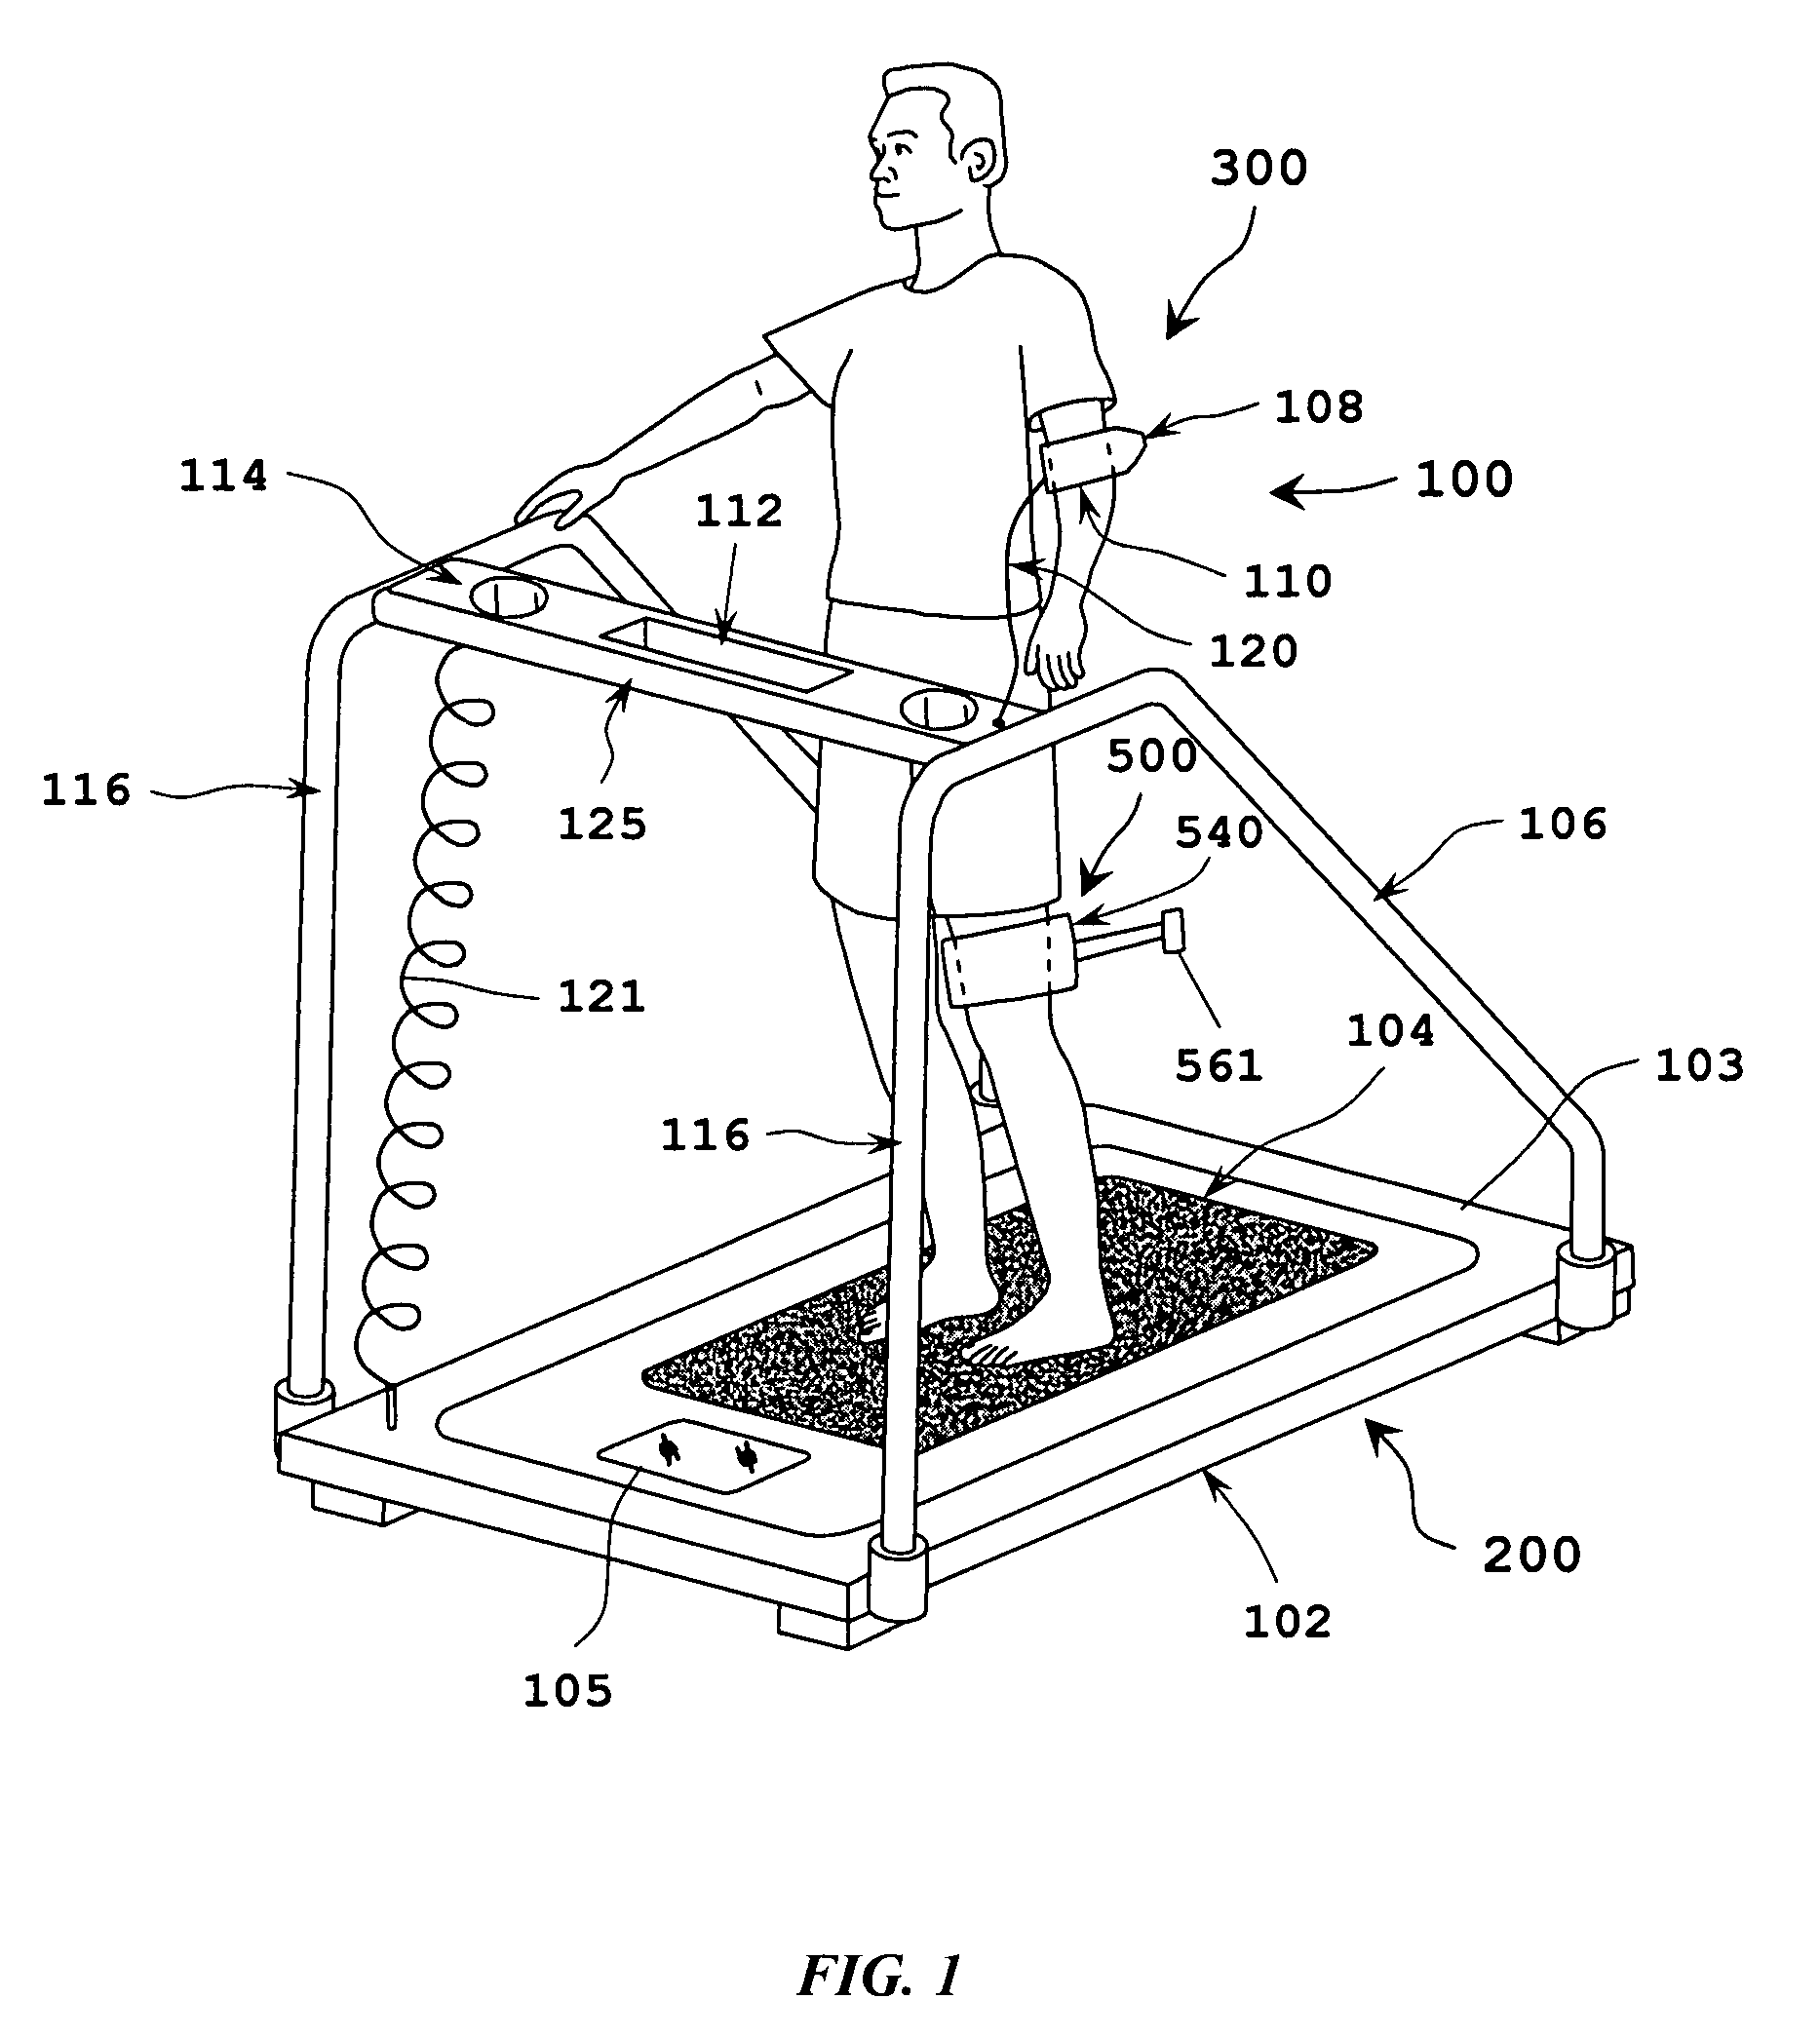 System and method for providing therapeutic treatment using a combination of ultrasound and vibrational stimulation